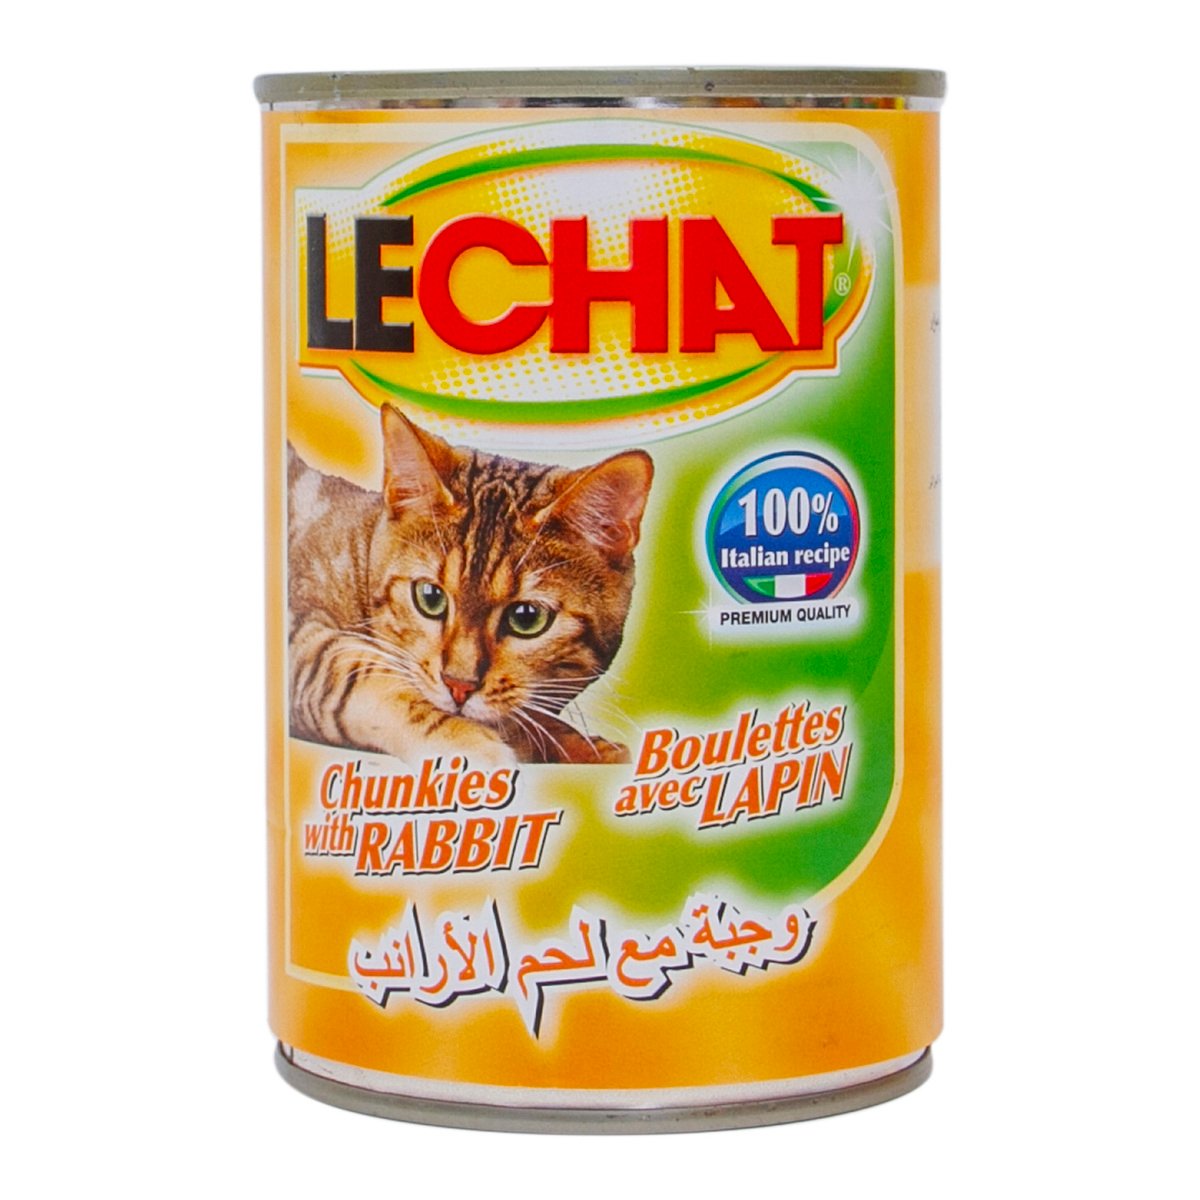 Lechat Cat Food Chunkies With Rabbit 400 g